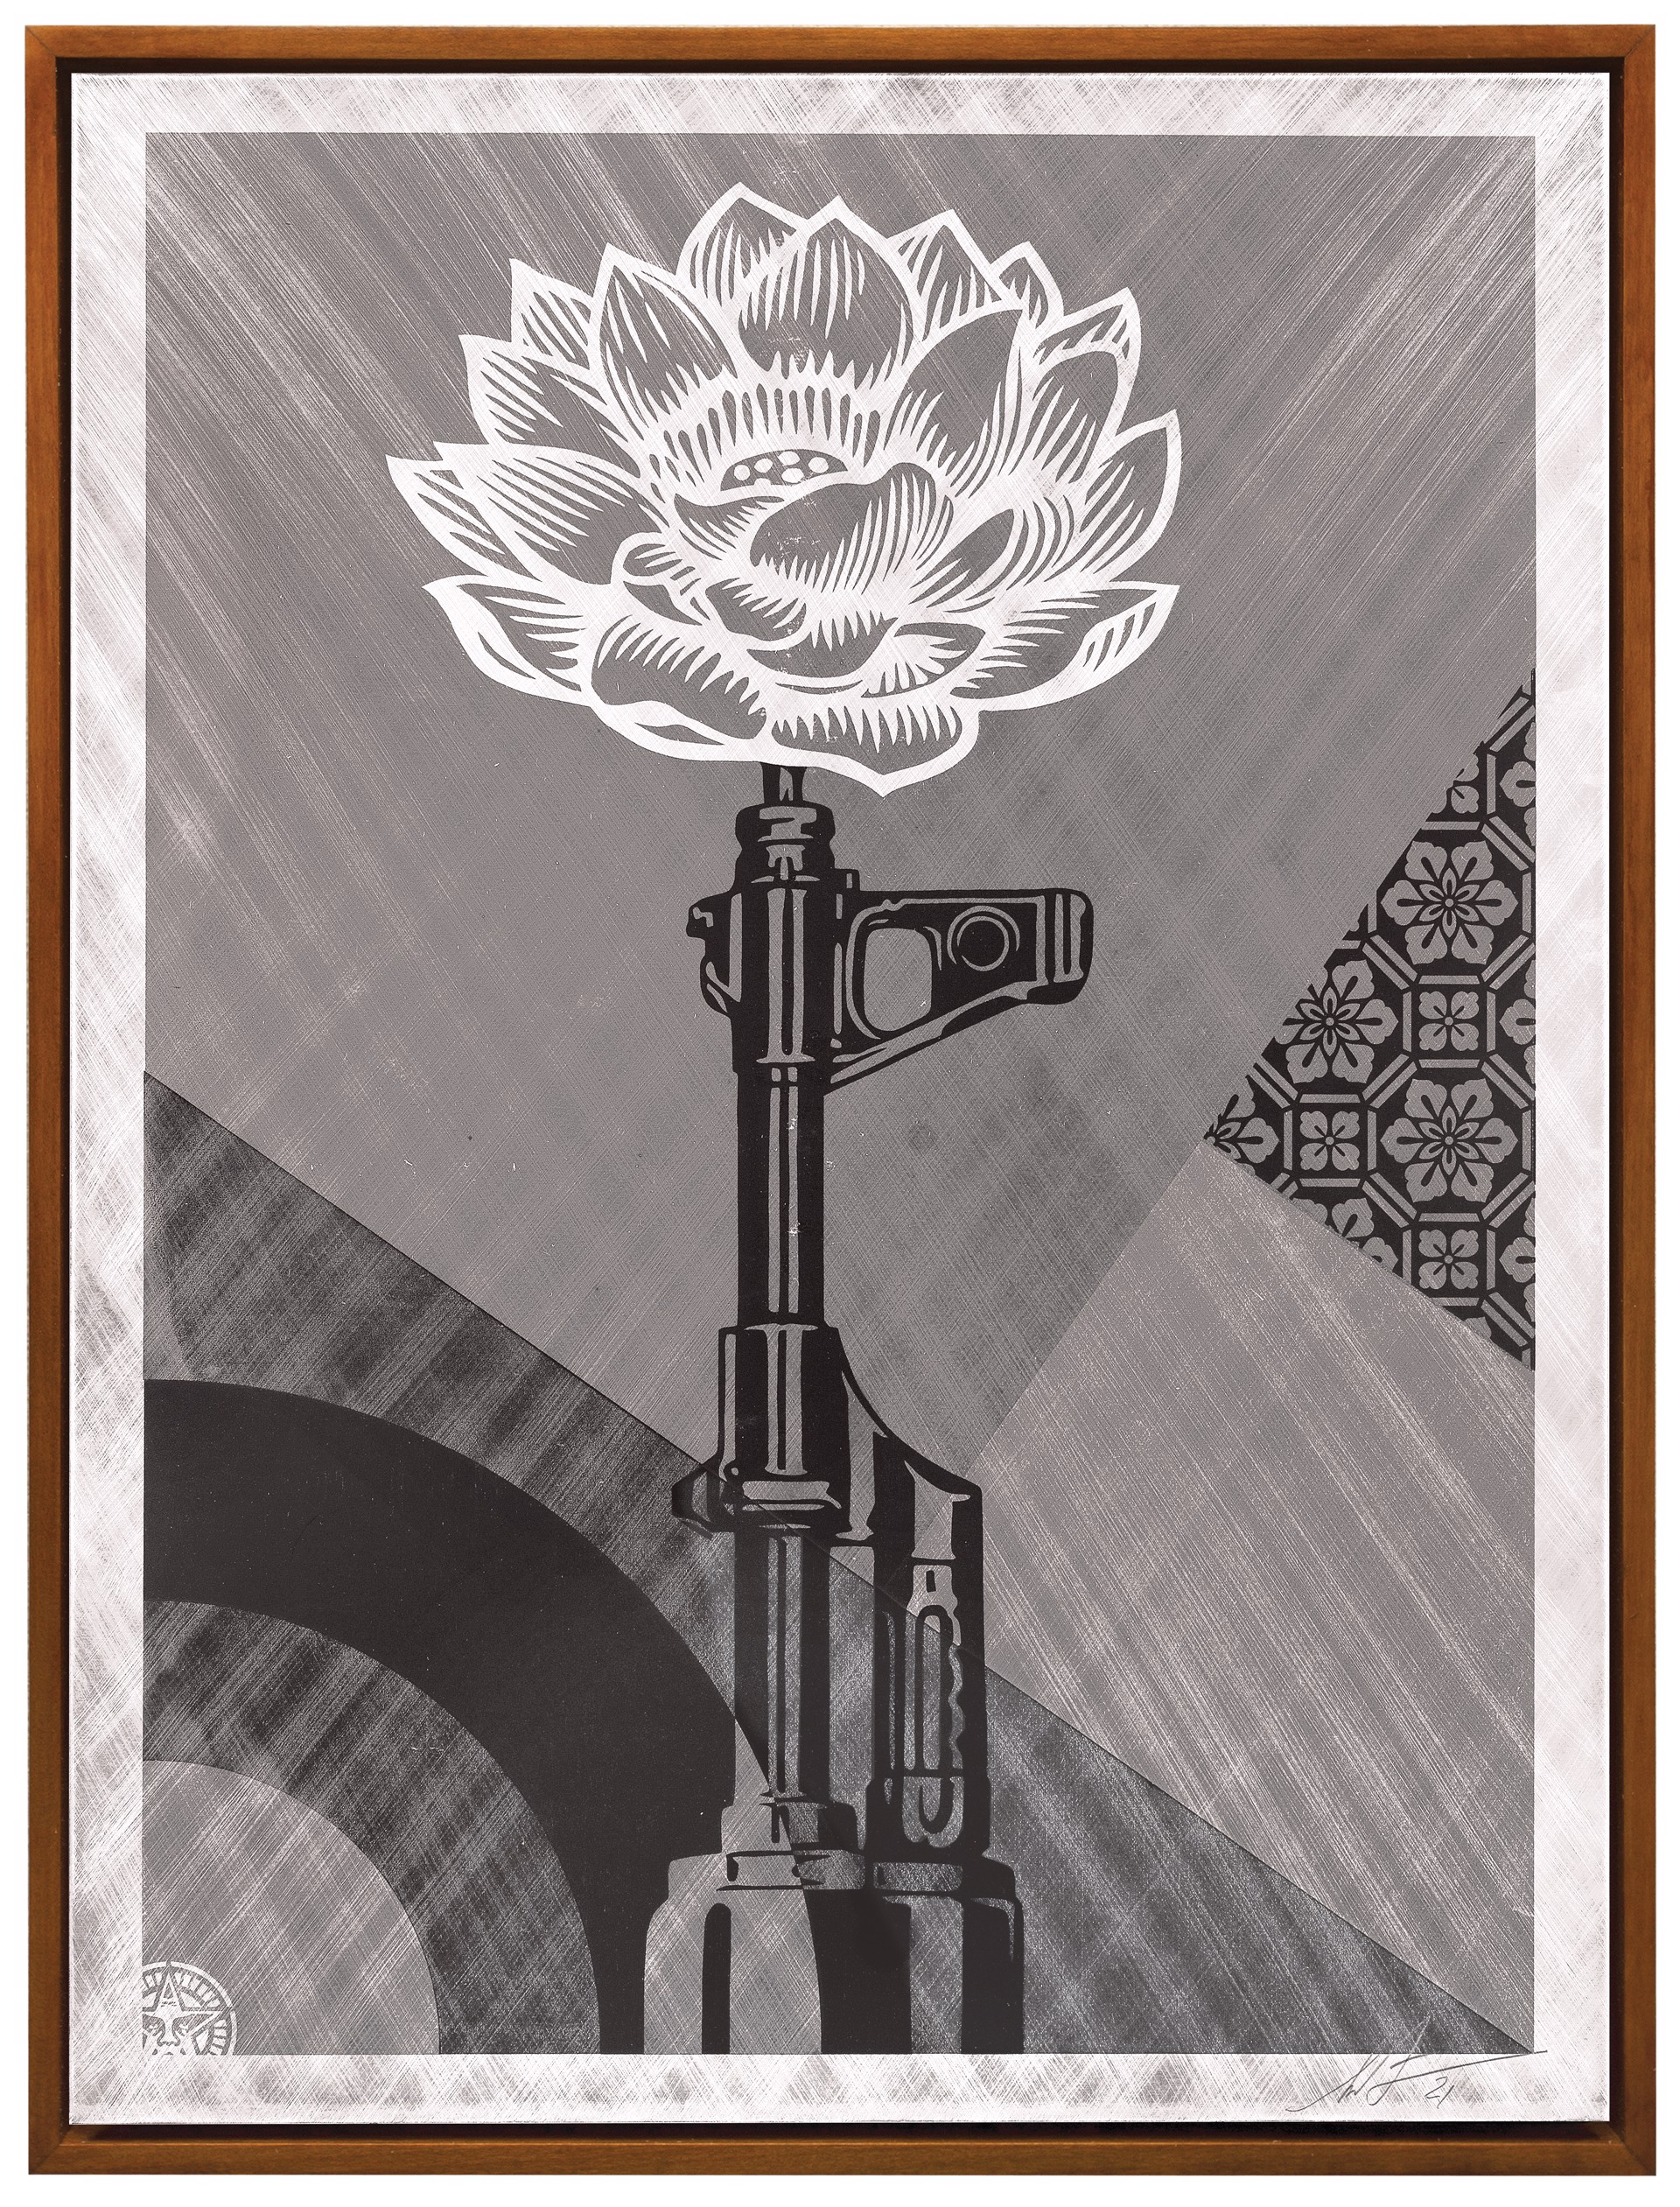 AK-47 Lotus by Shepard Fairey / Limited editions